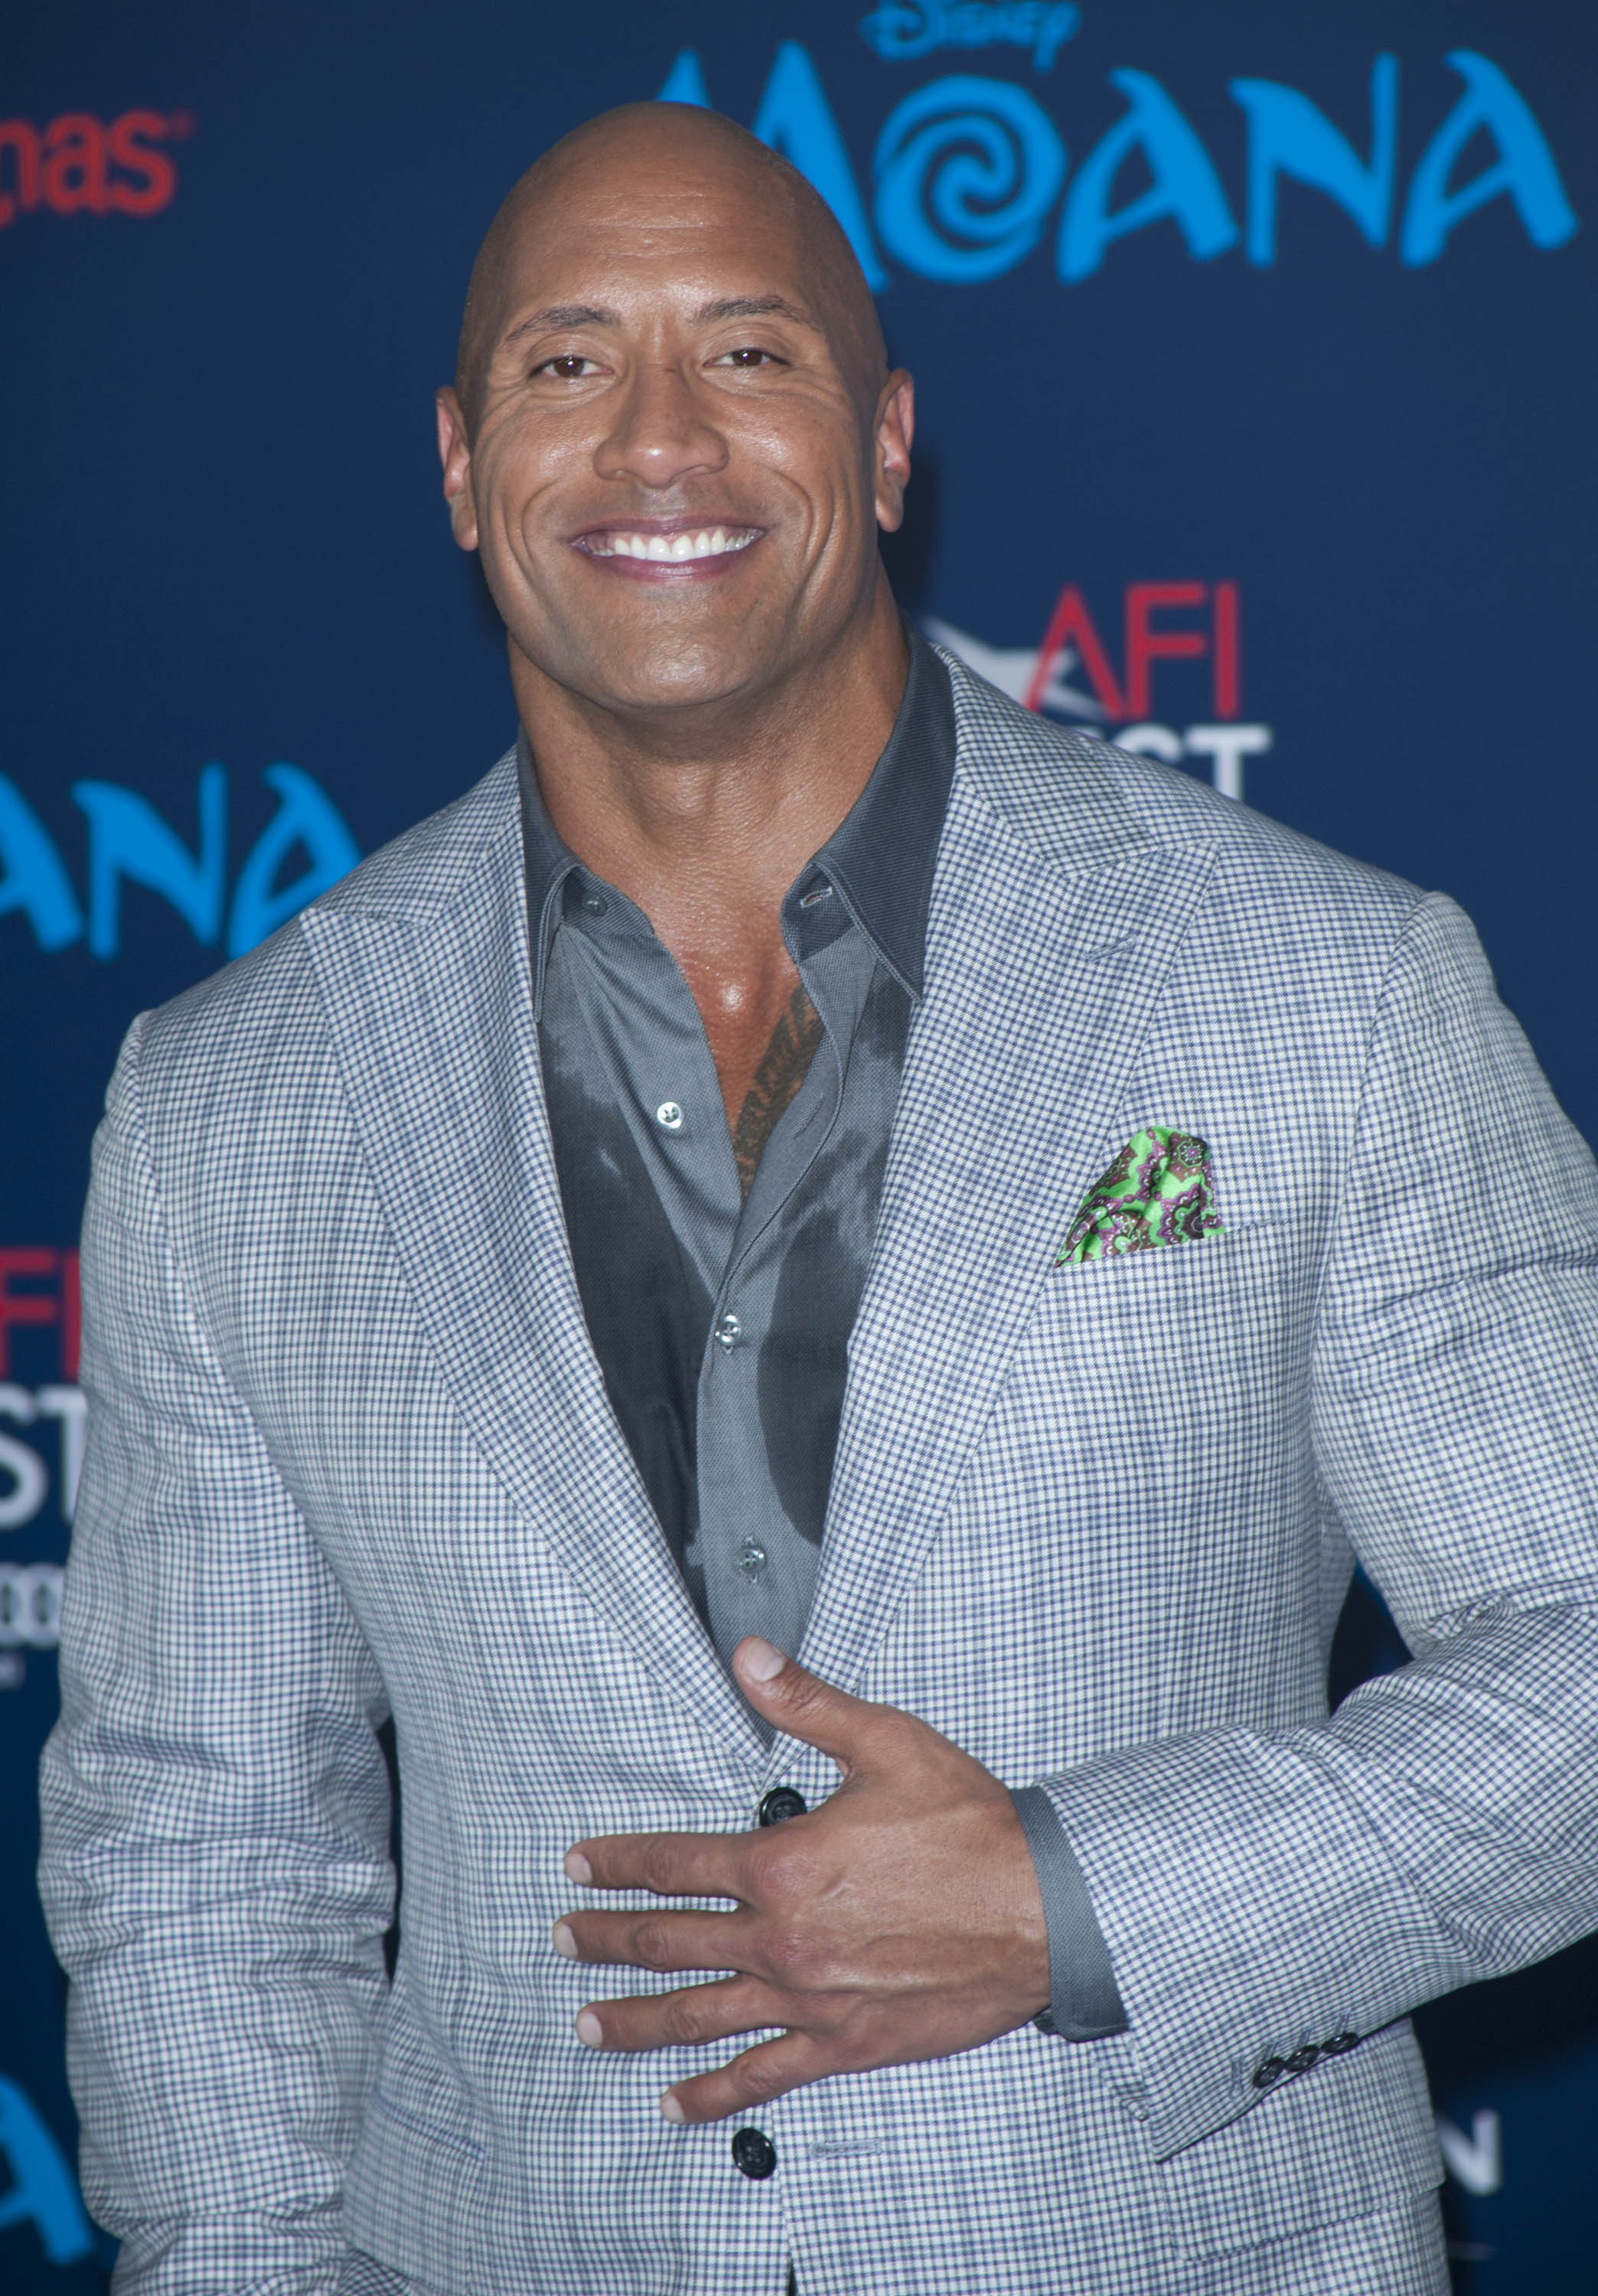 Dwayne Johnson at the Disney premiere of "Moana"  in Hollywood, California, on November 14, 2016 | Source: Getty Images